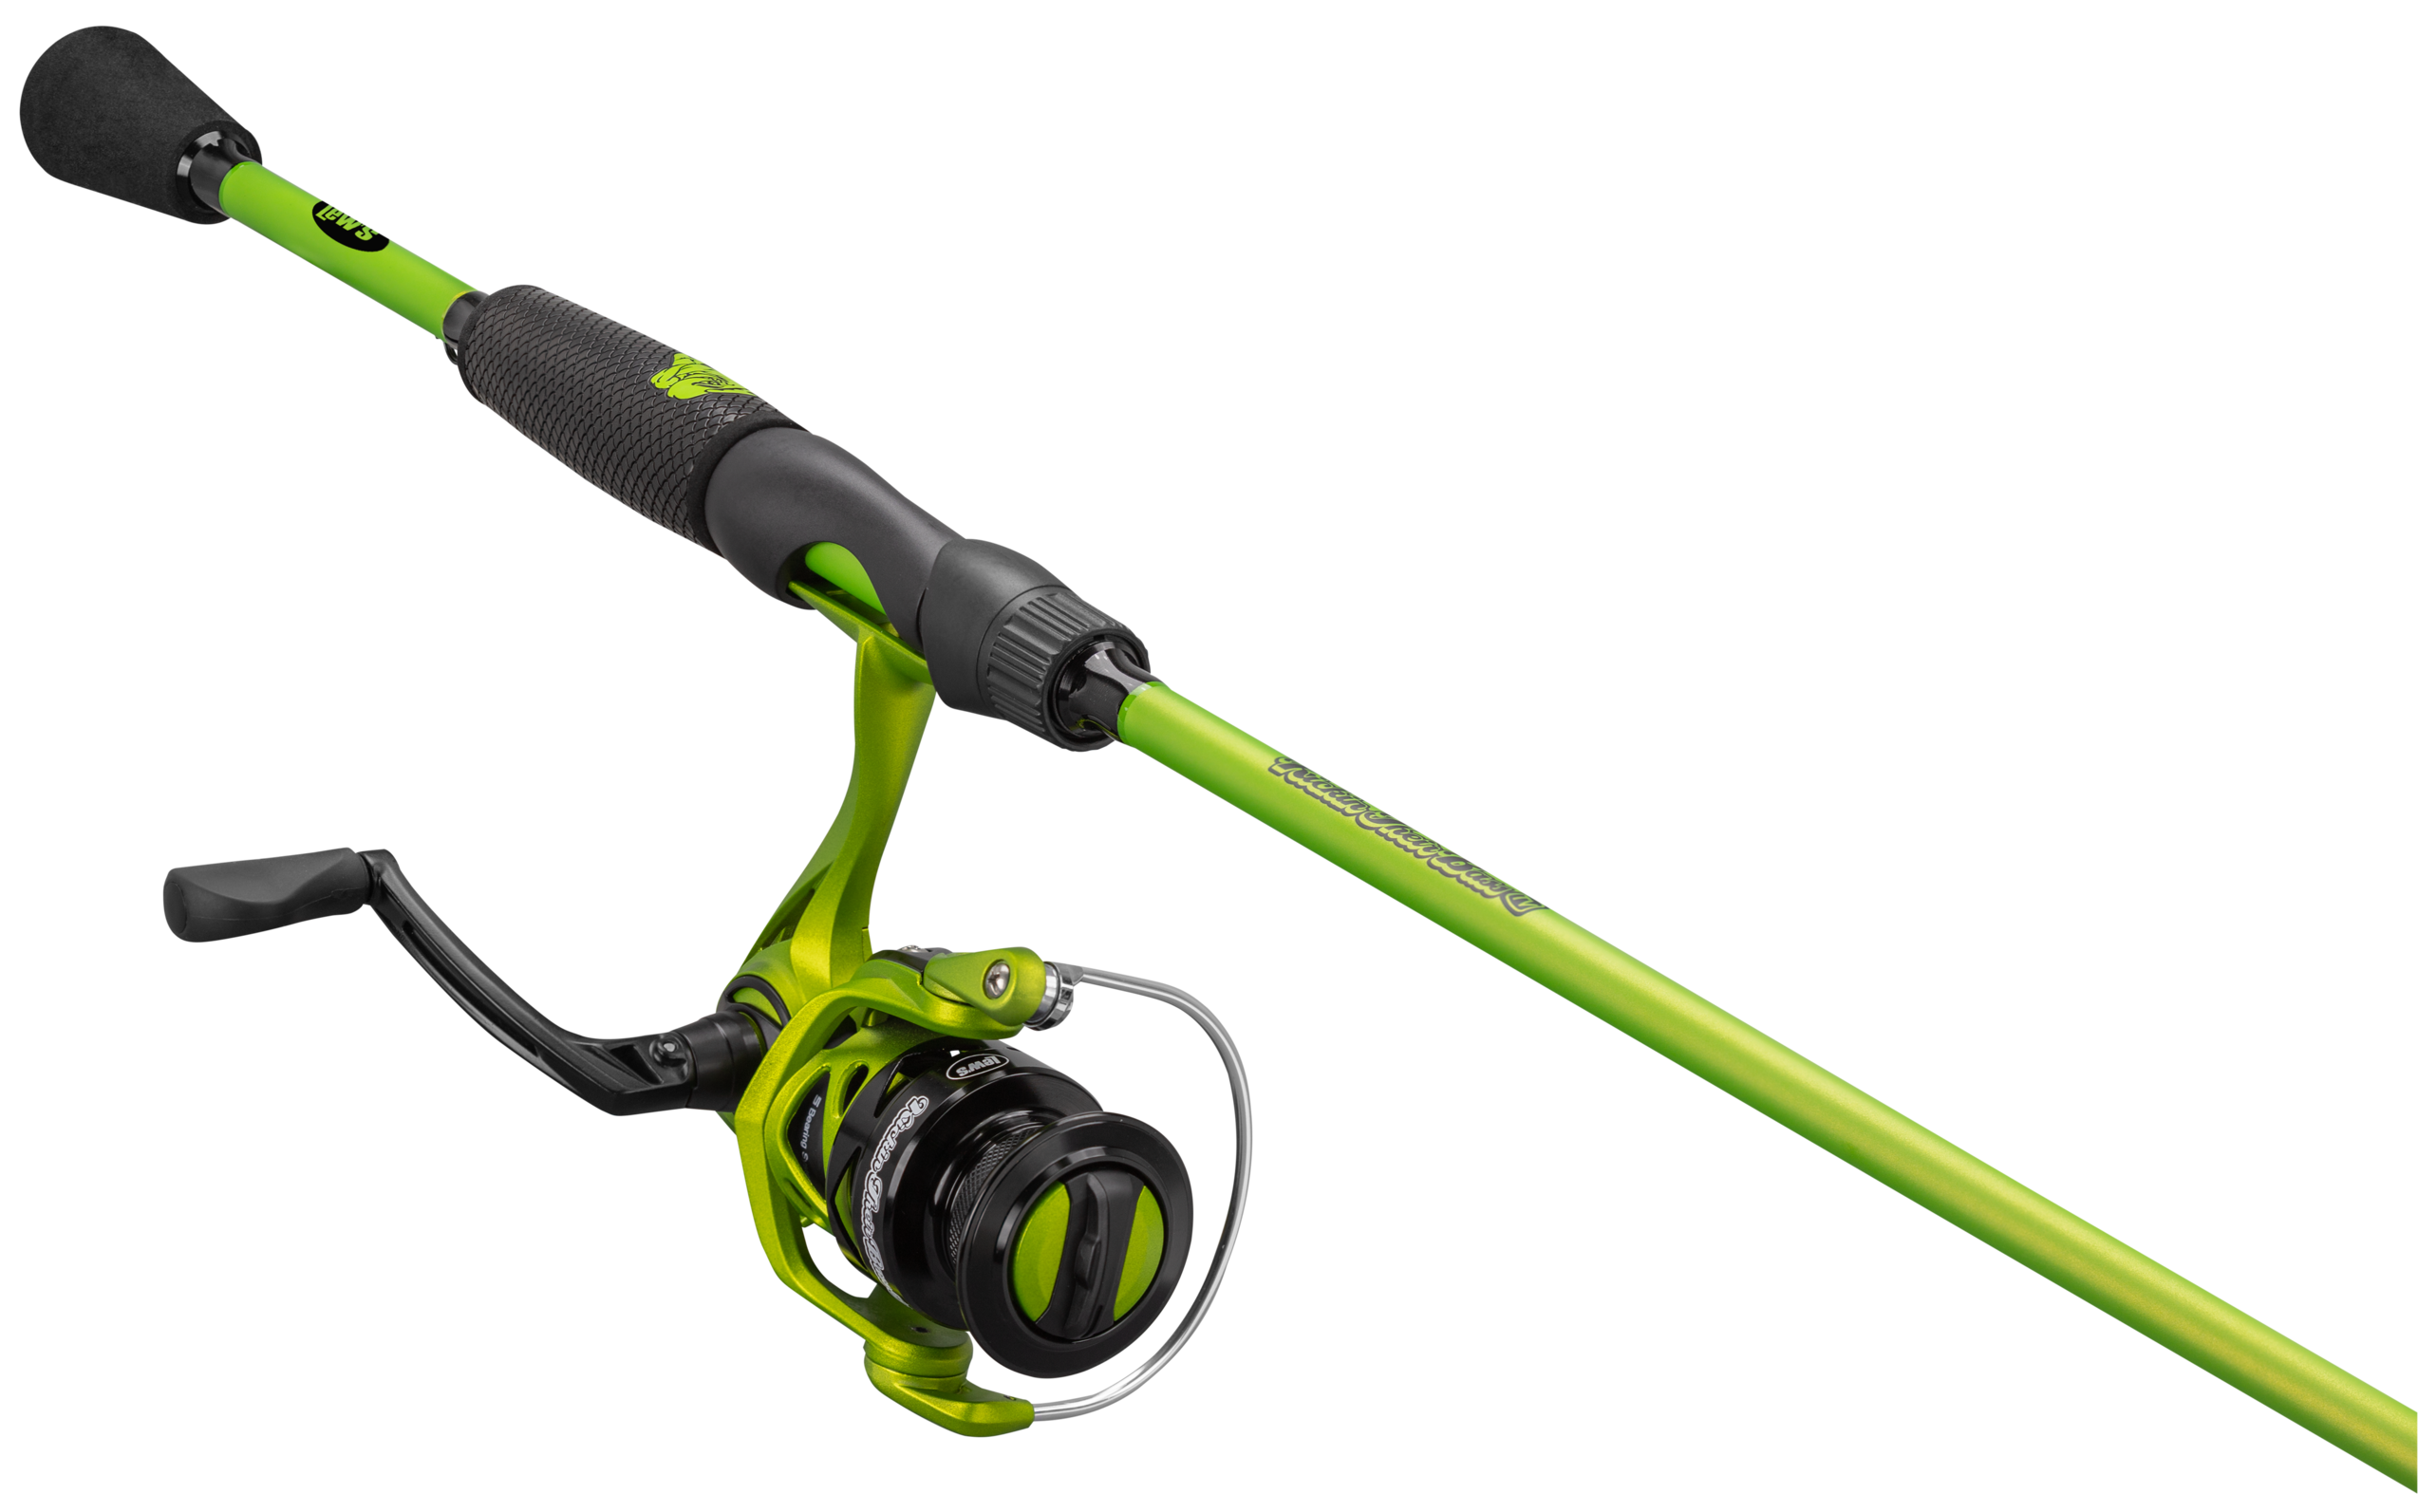 Lew's Mach Crush Rod and Reel Spinning Combo